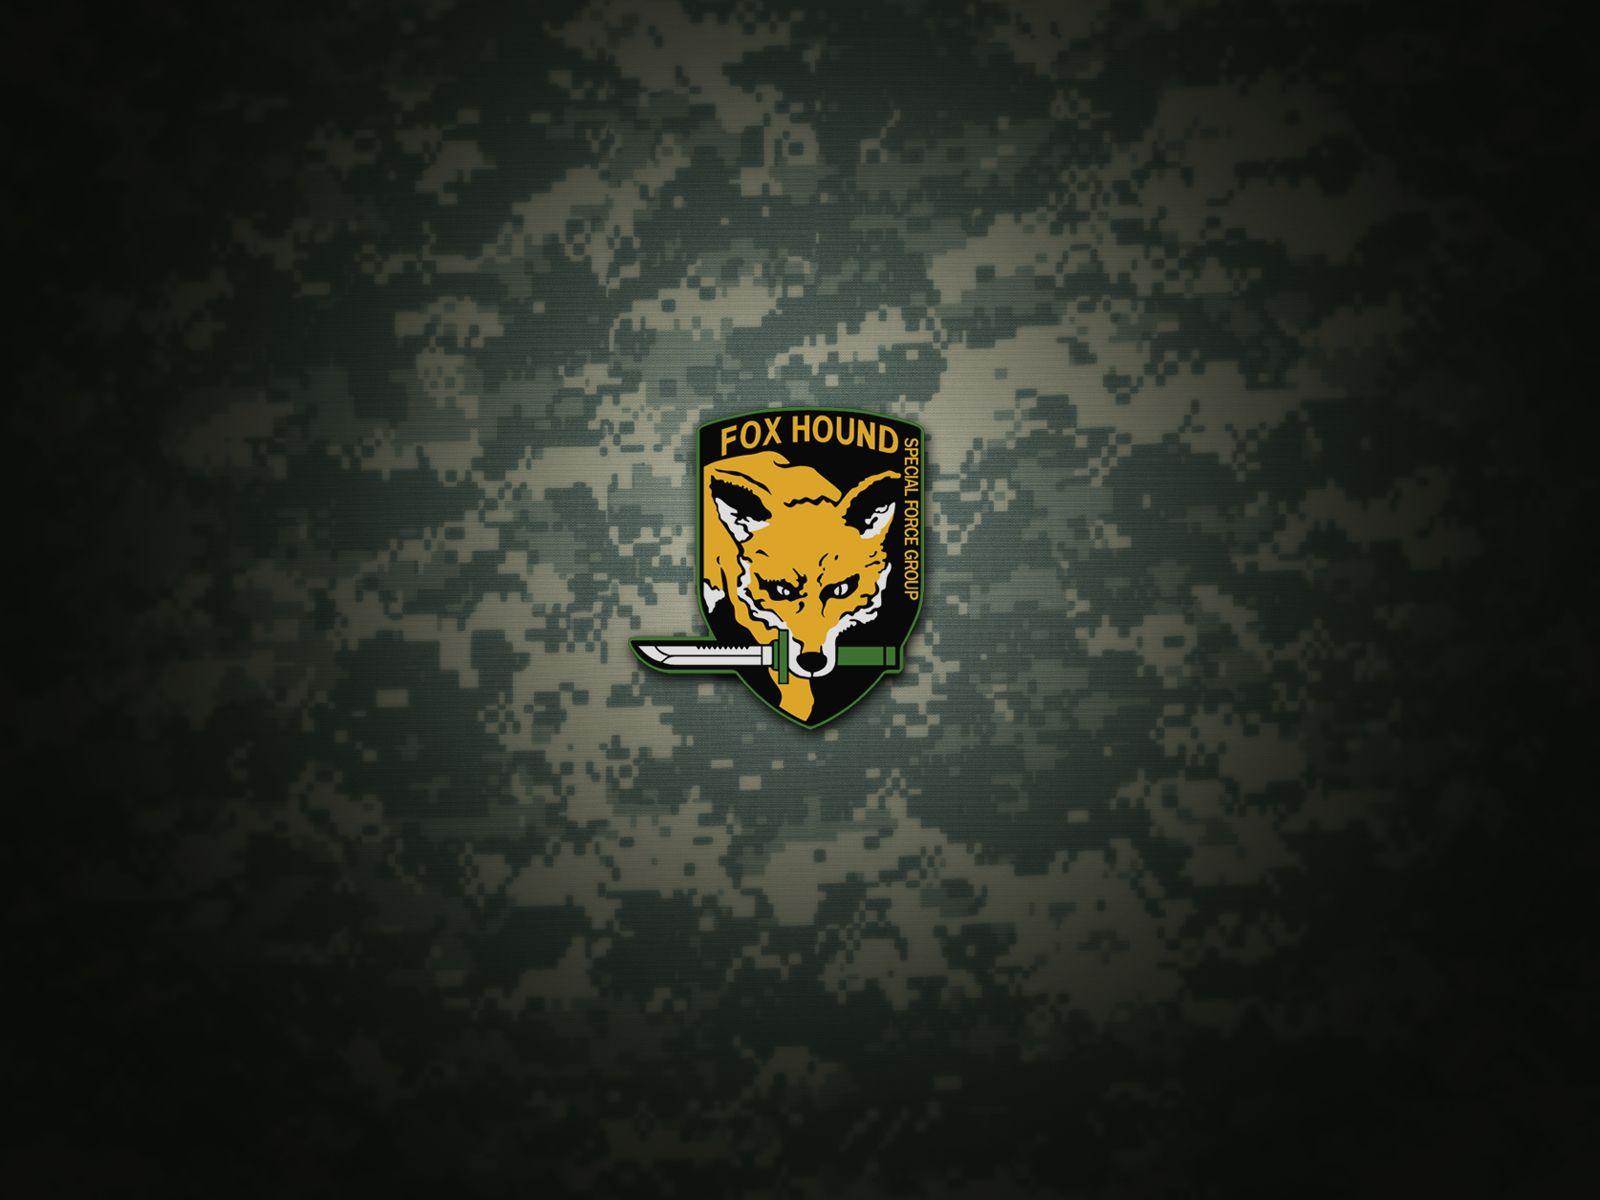 FOXHOUND Wallpaper and Background Imagex1200